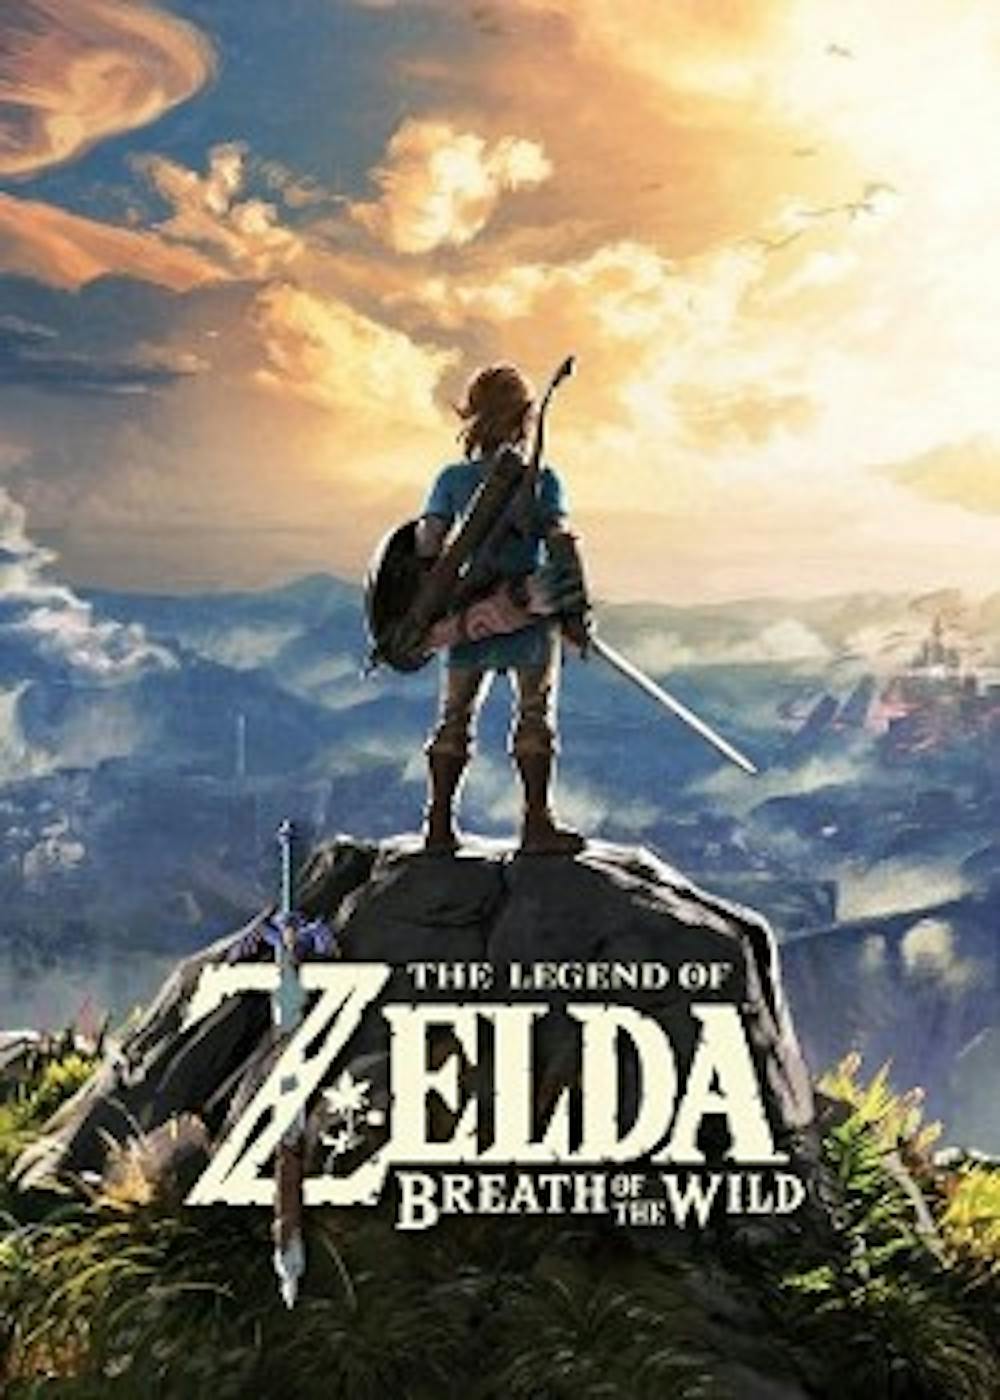 <p>"The Legend of Zelda: Breath of the Wild" brings back the freedom of earlier games starring Link.</p>